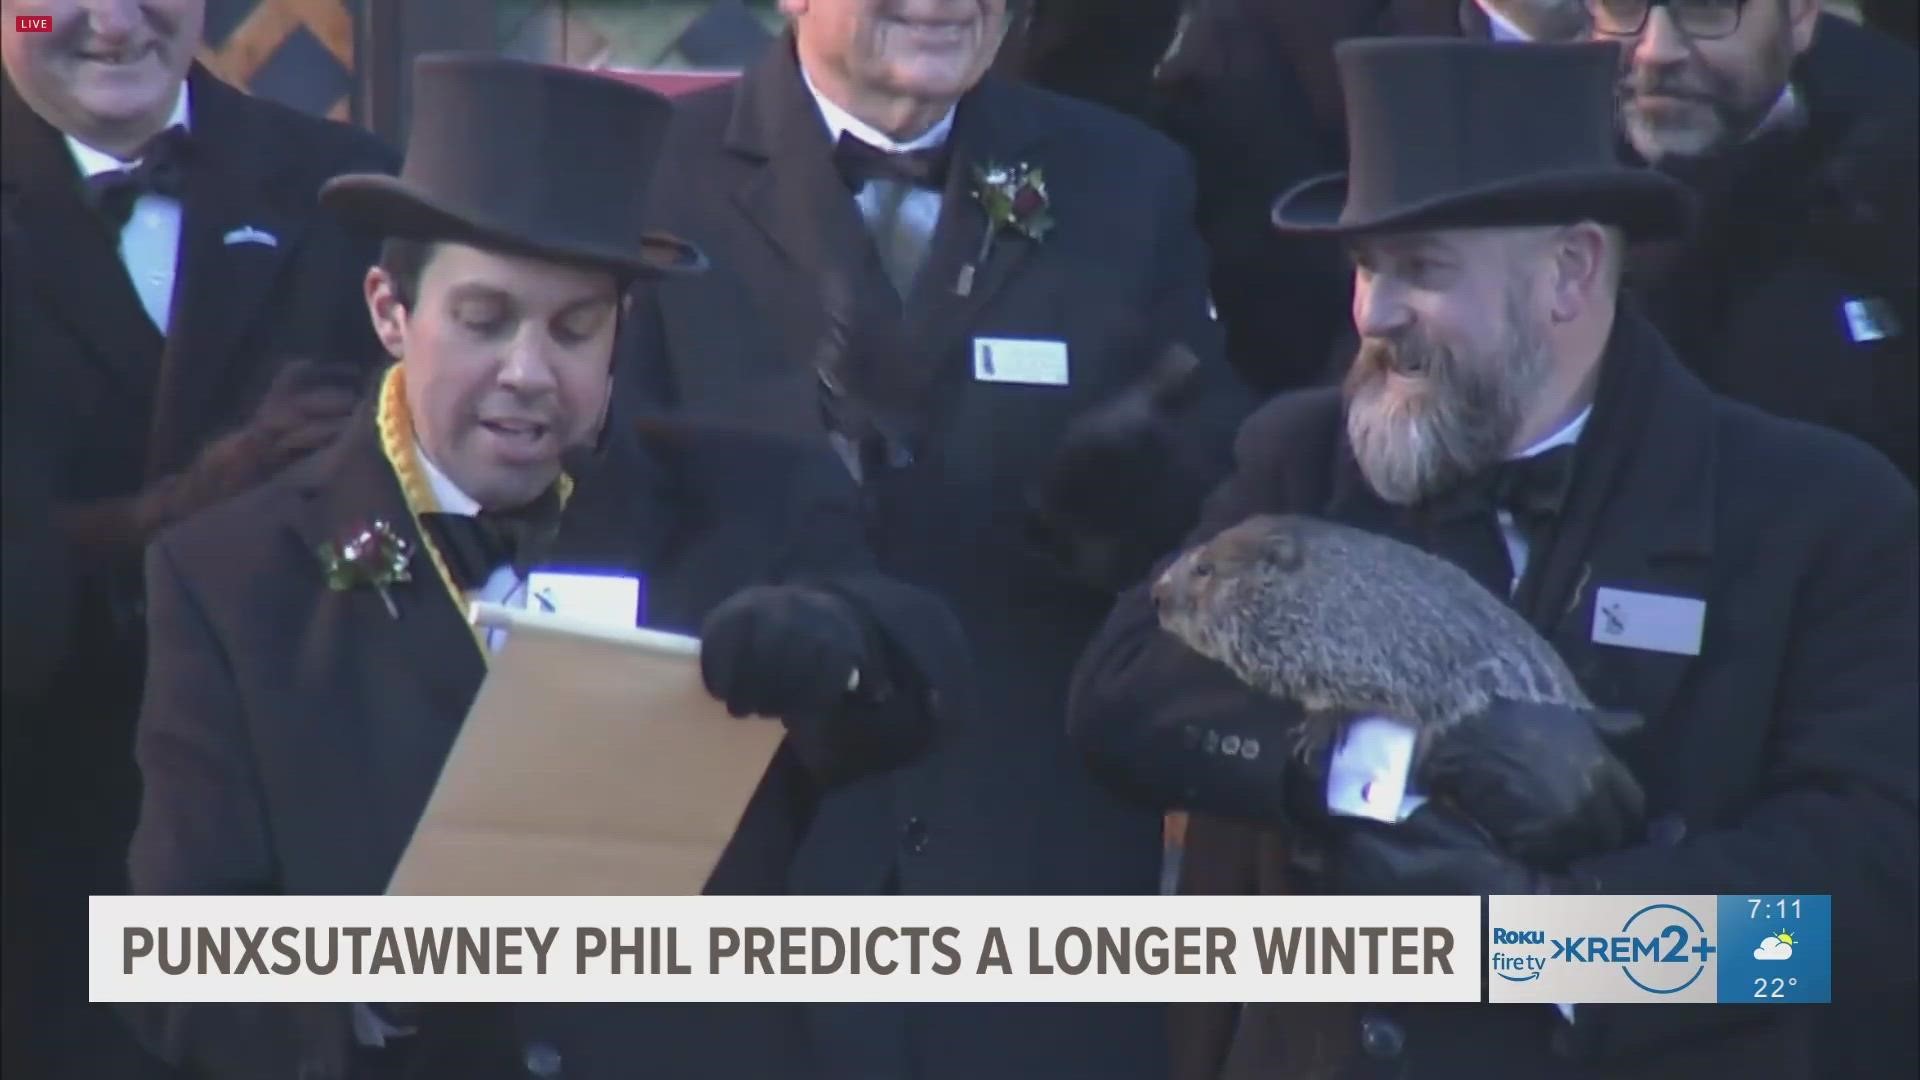 Punxsutawney Phil says more winter, but how accurate is he?